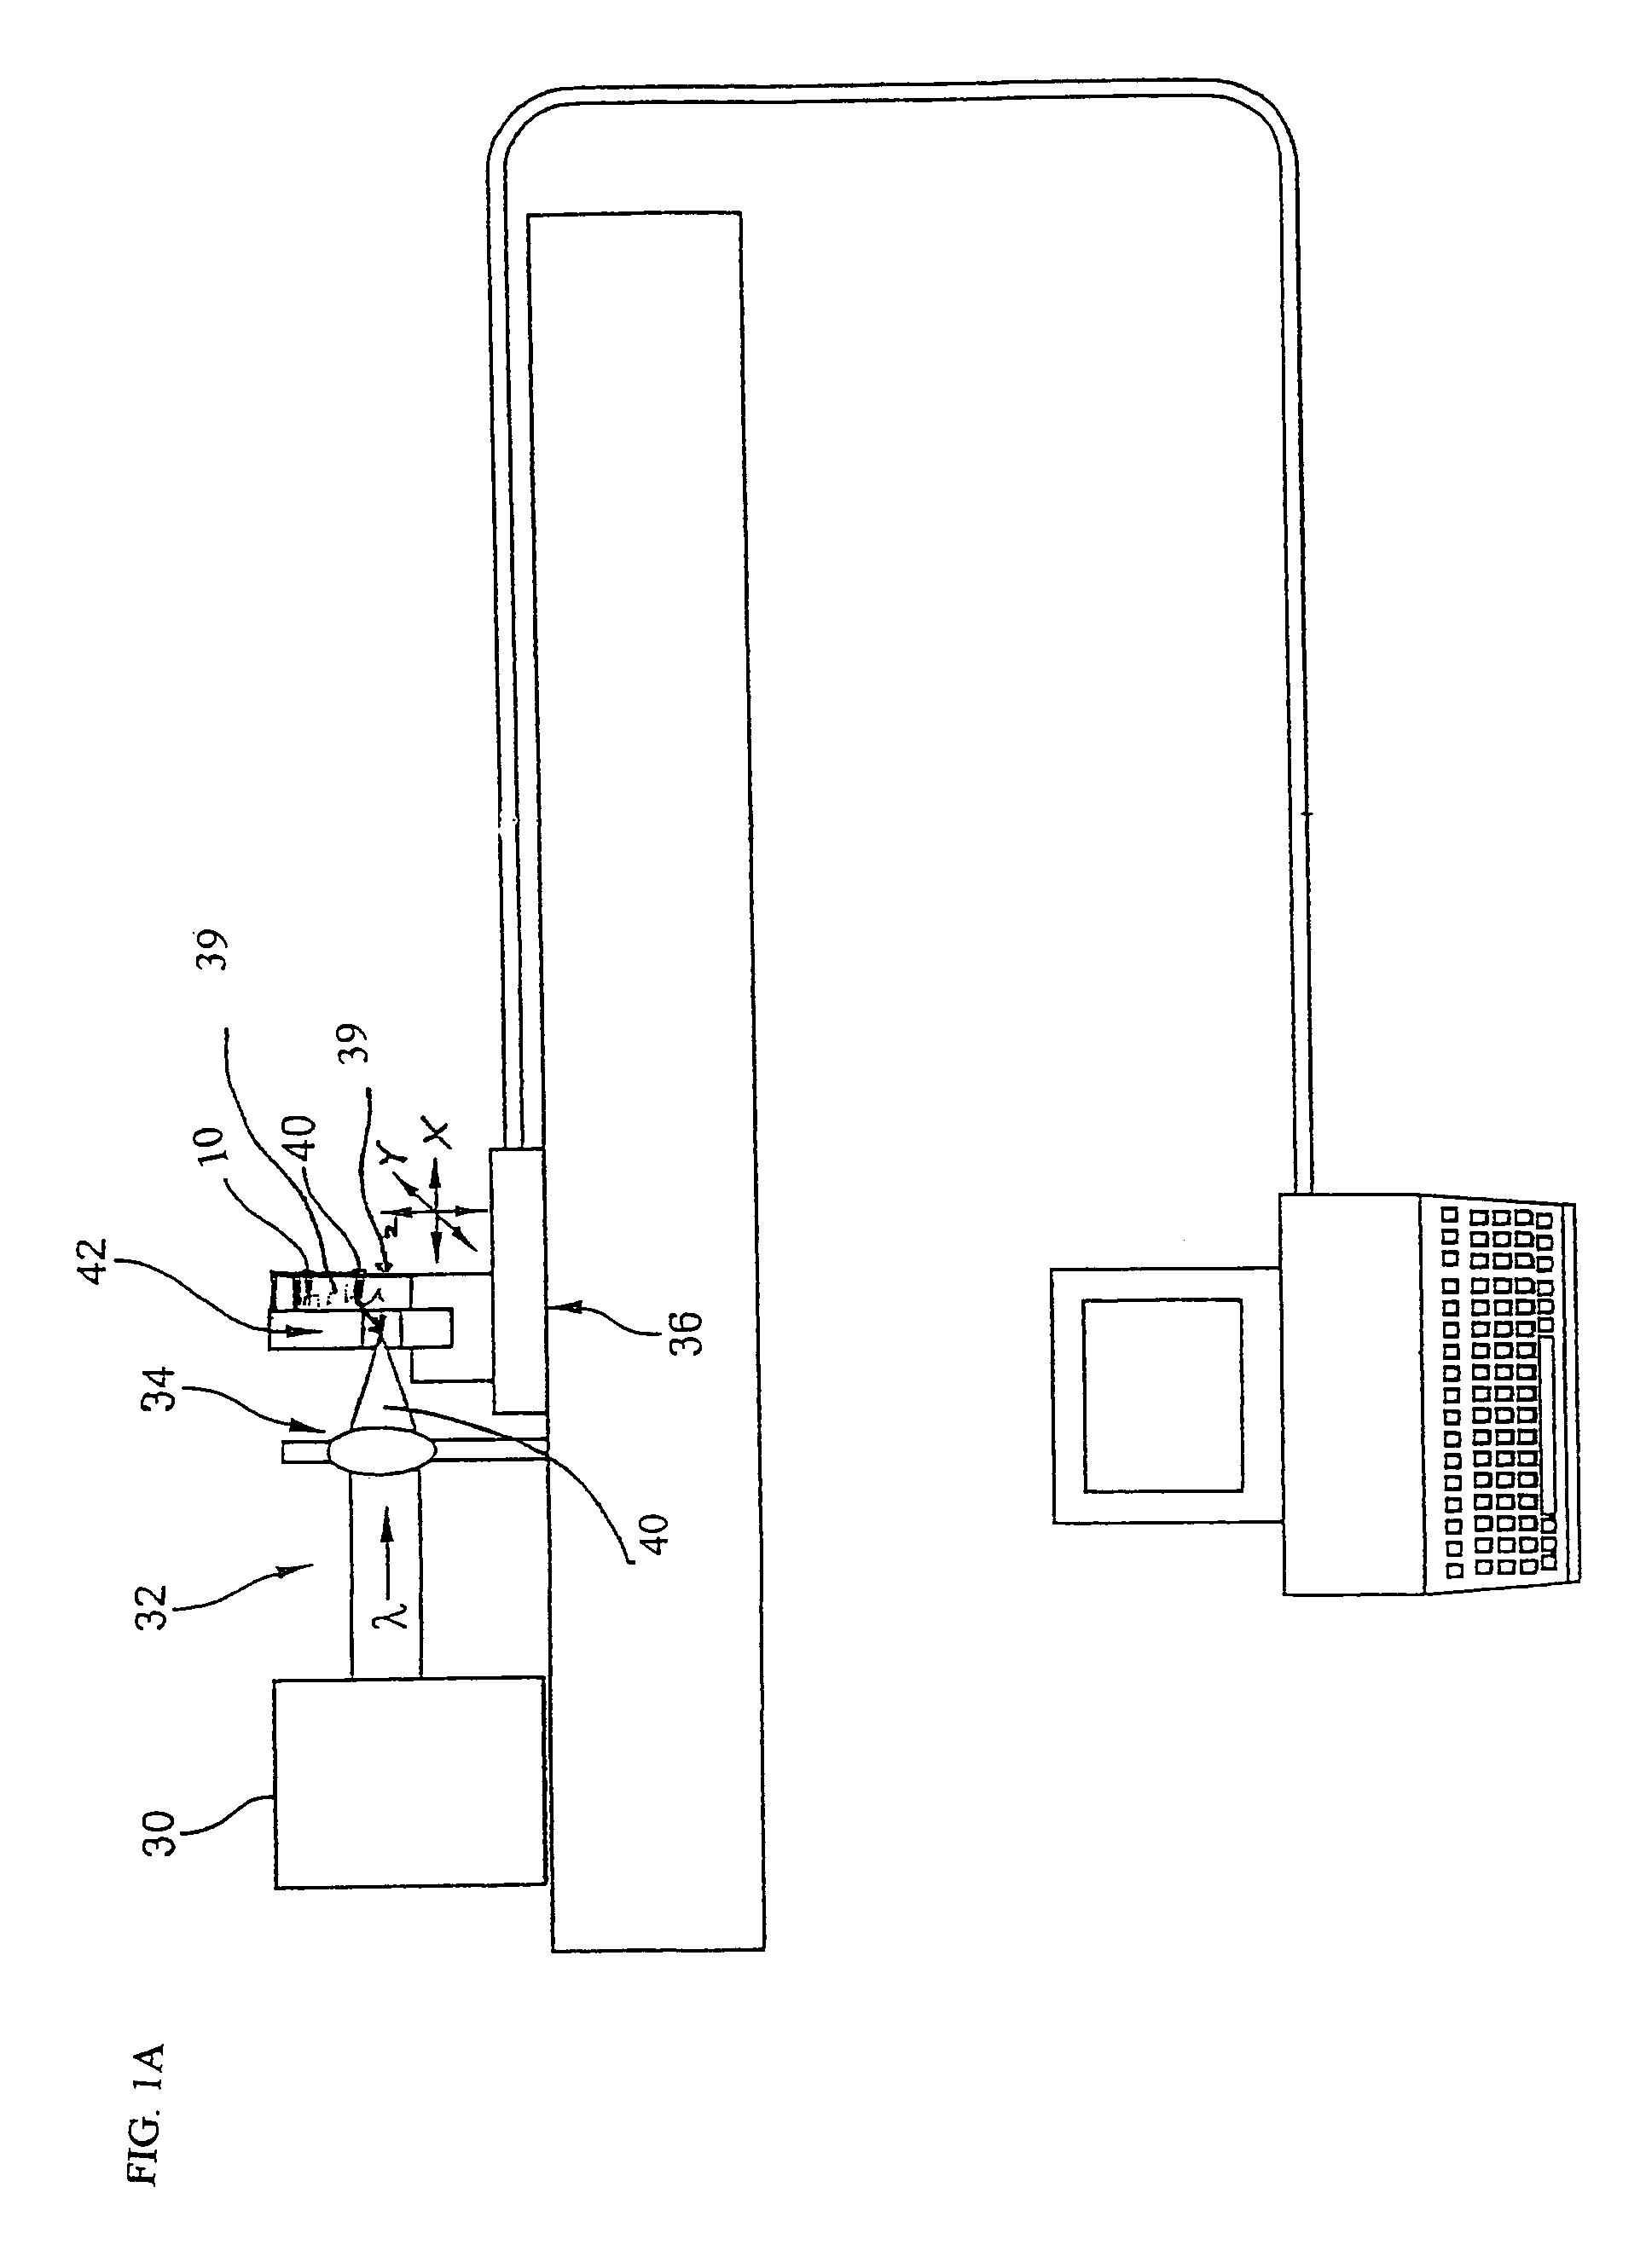 Method of making at least one hole in a transparent body and devices made by this method